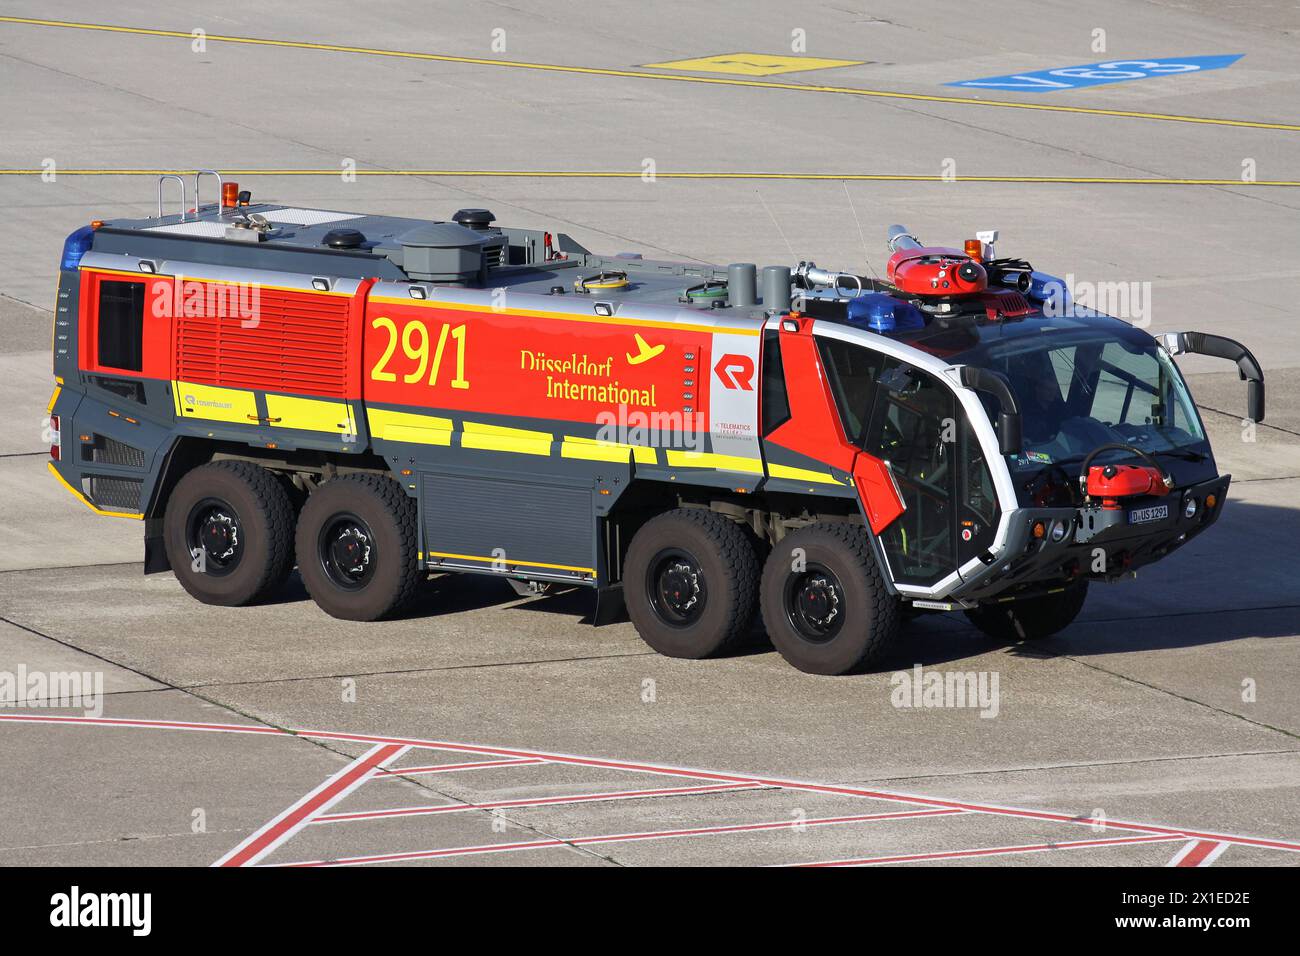 Rosenbauer Panther airport rescue and firefighting vehicle at Dusseldorf airport Stock Photo